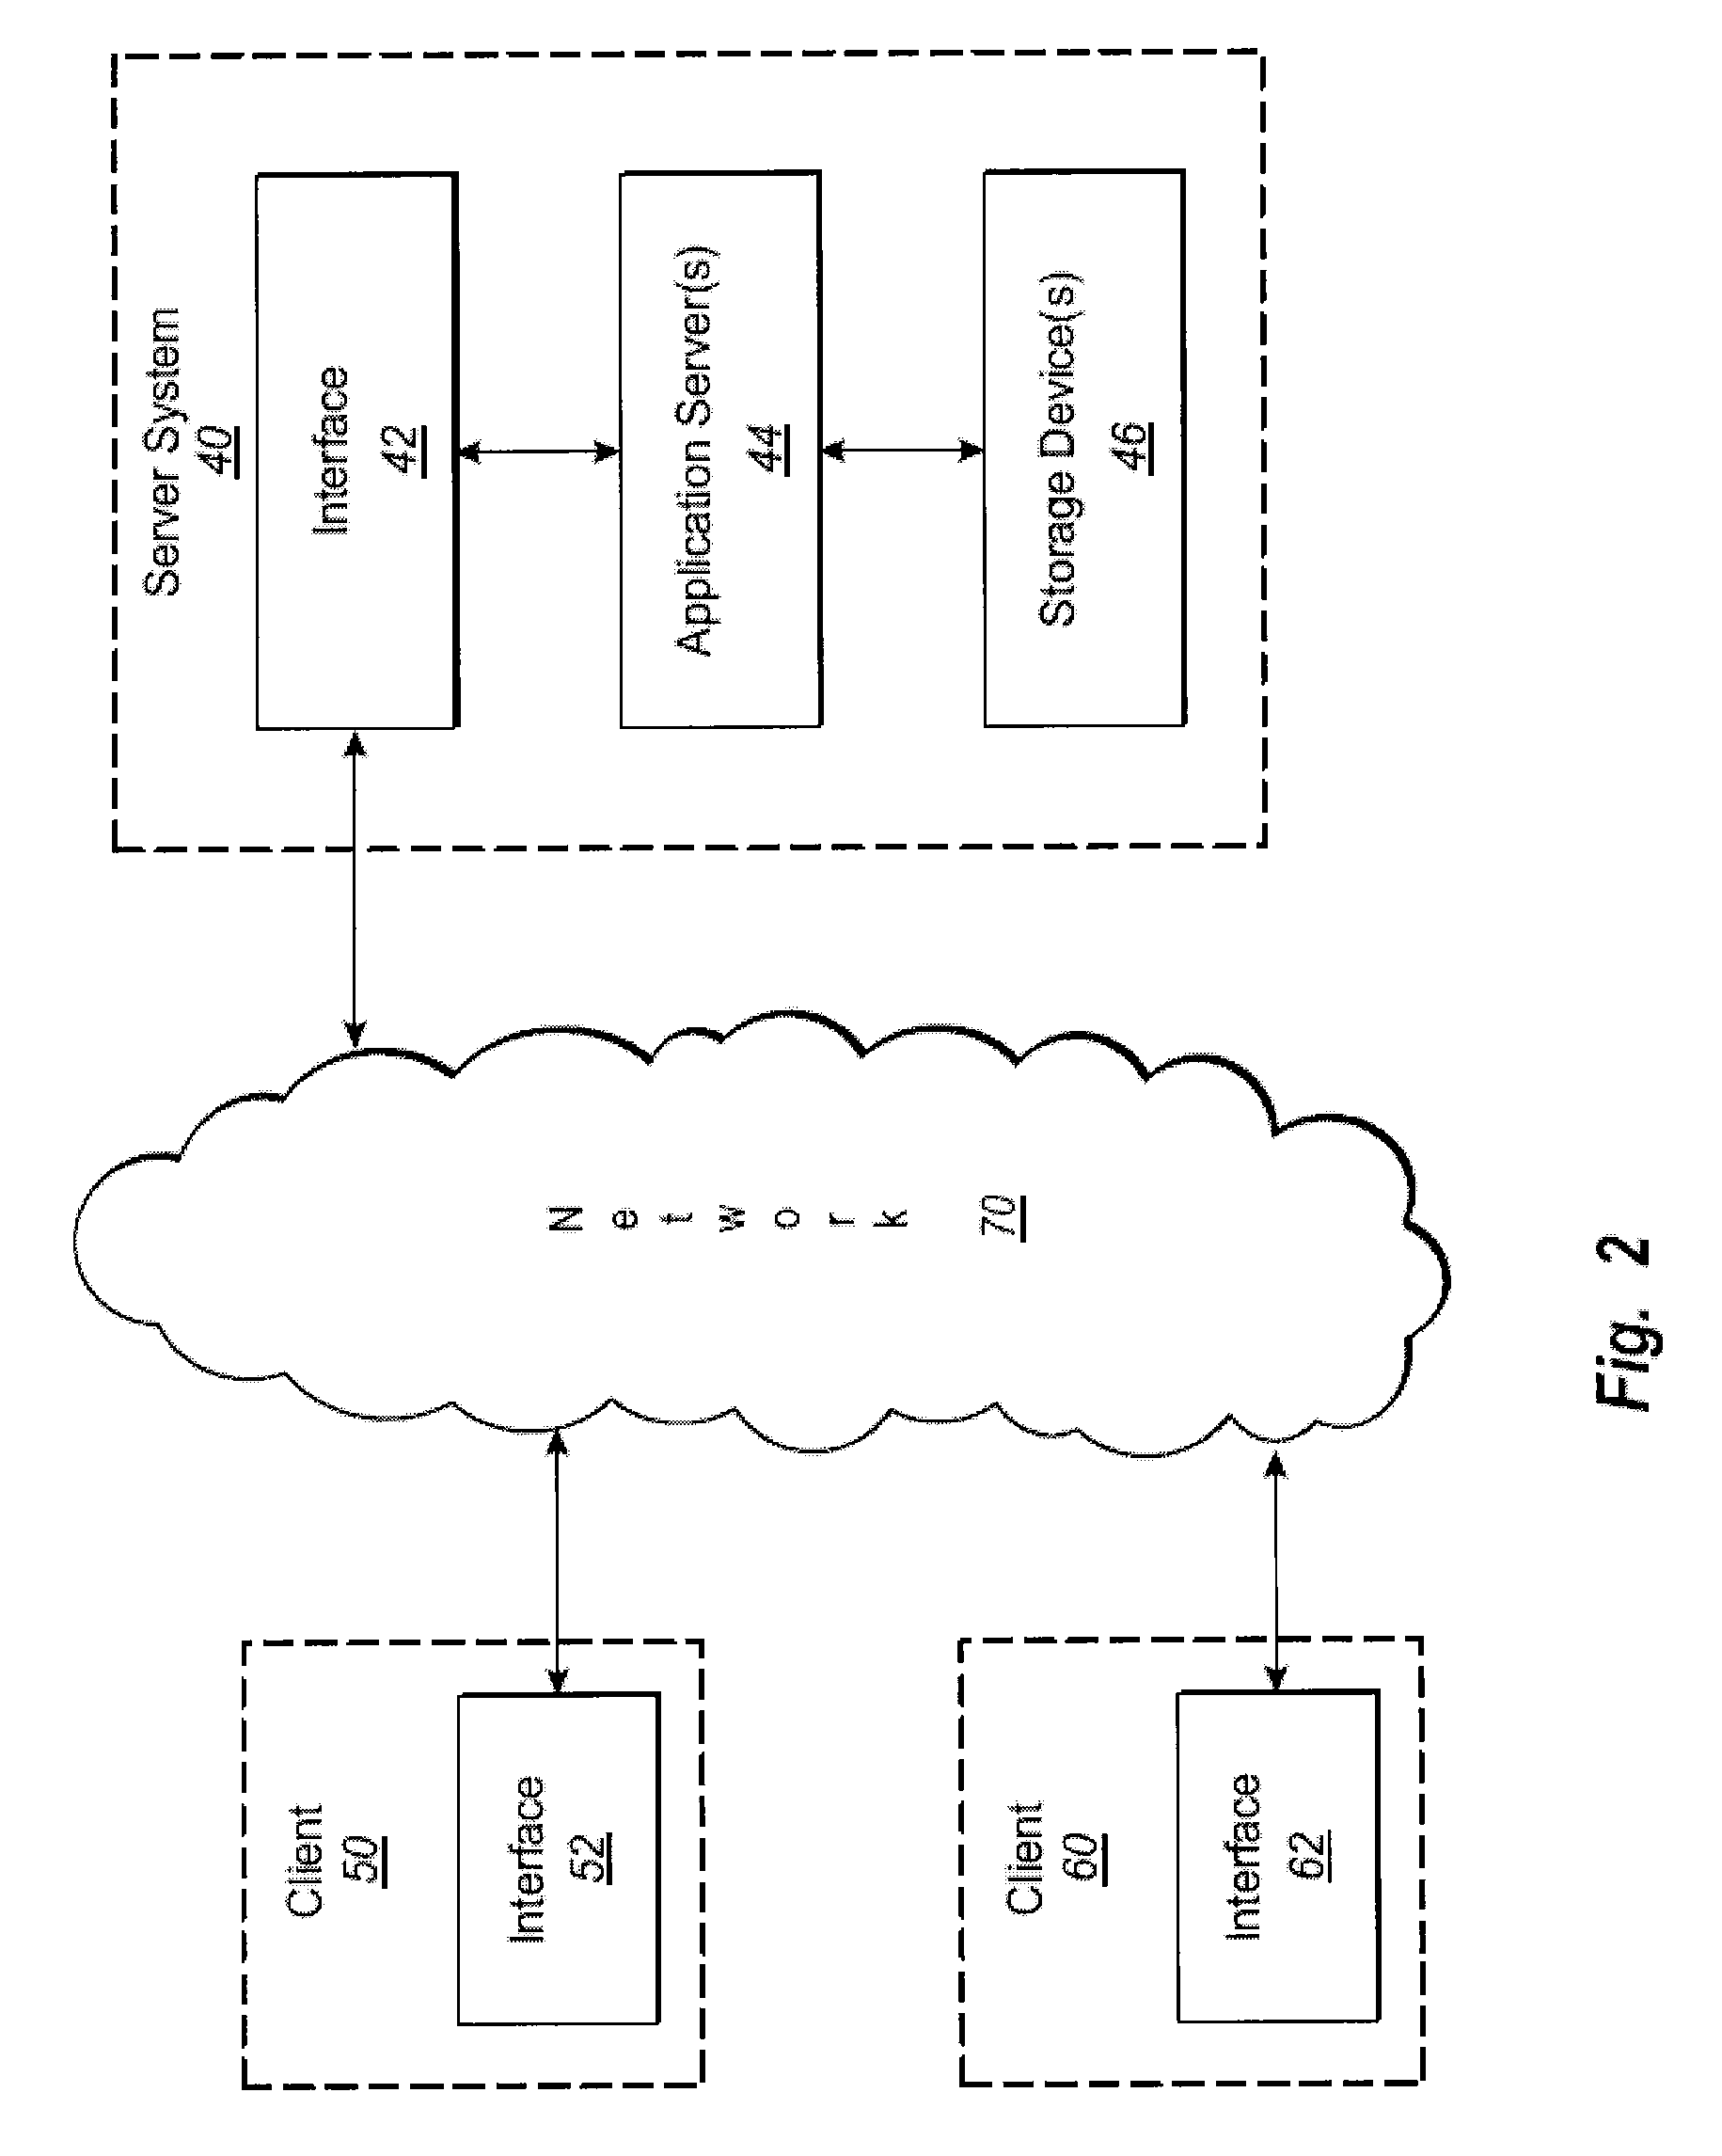 Dynamically integrating disparate computer-aided dispatch systems